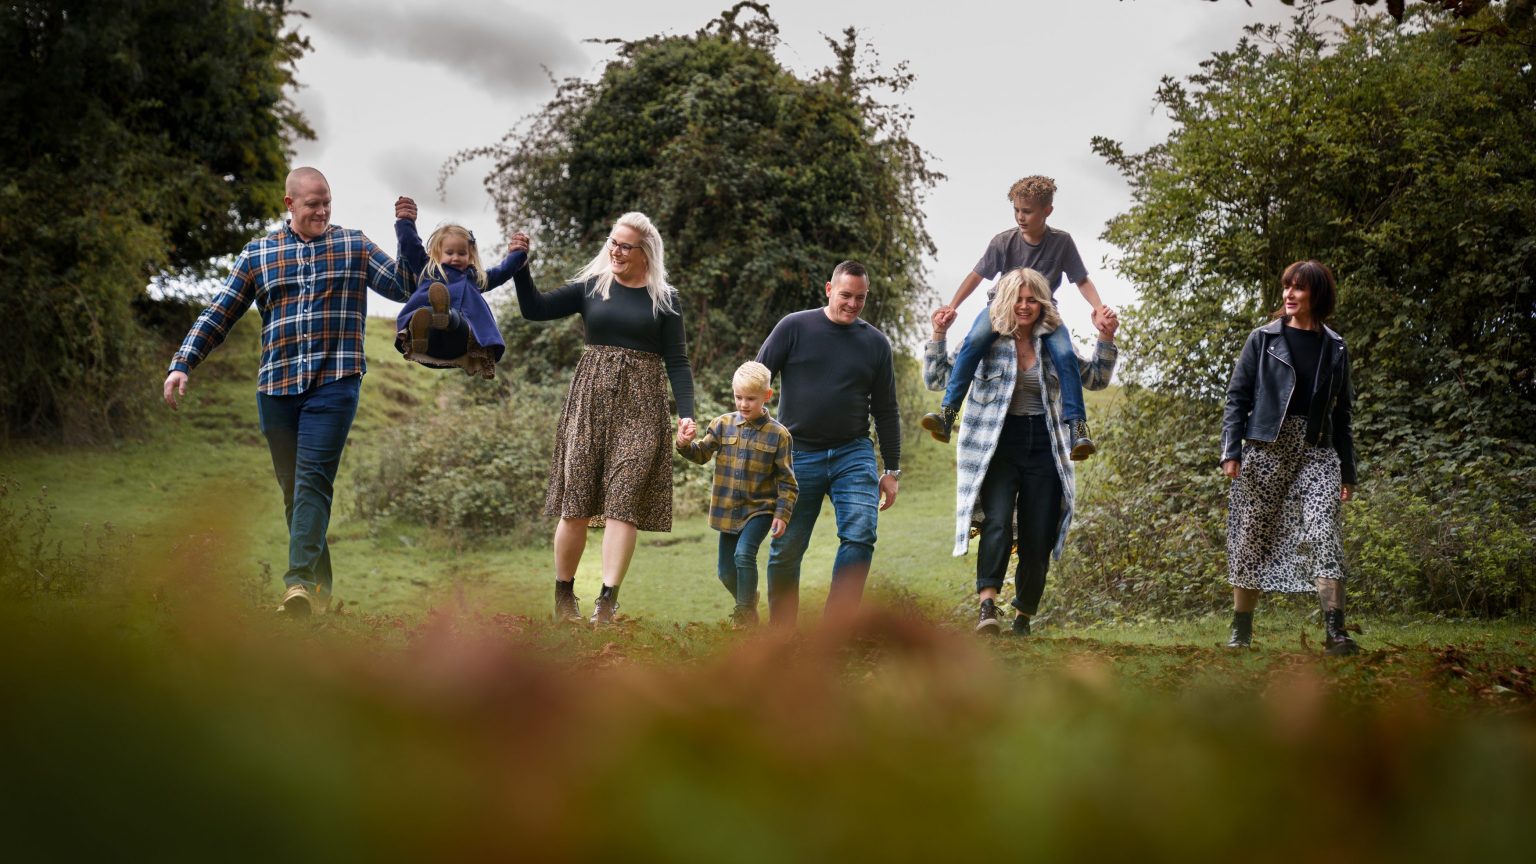 family portrait photography session at beverley westwood near hull